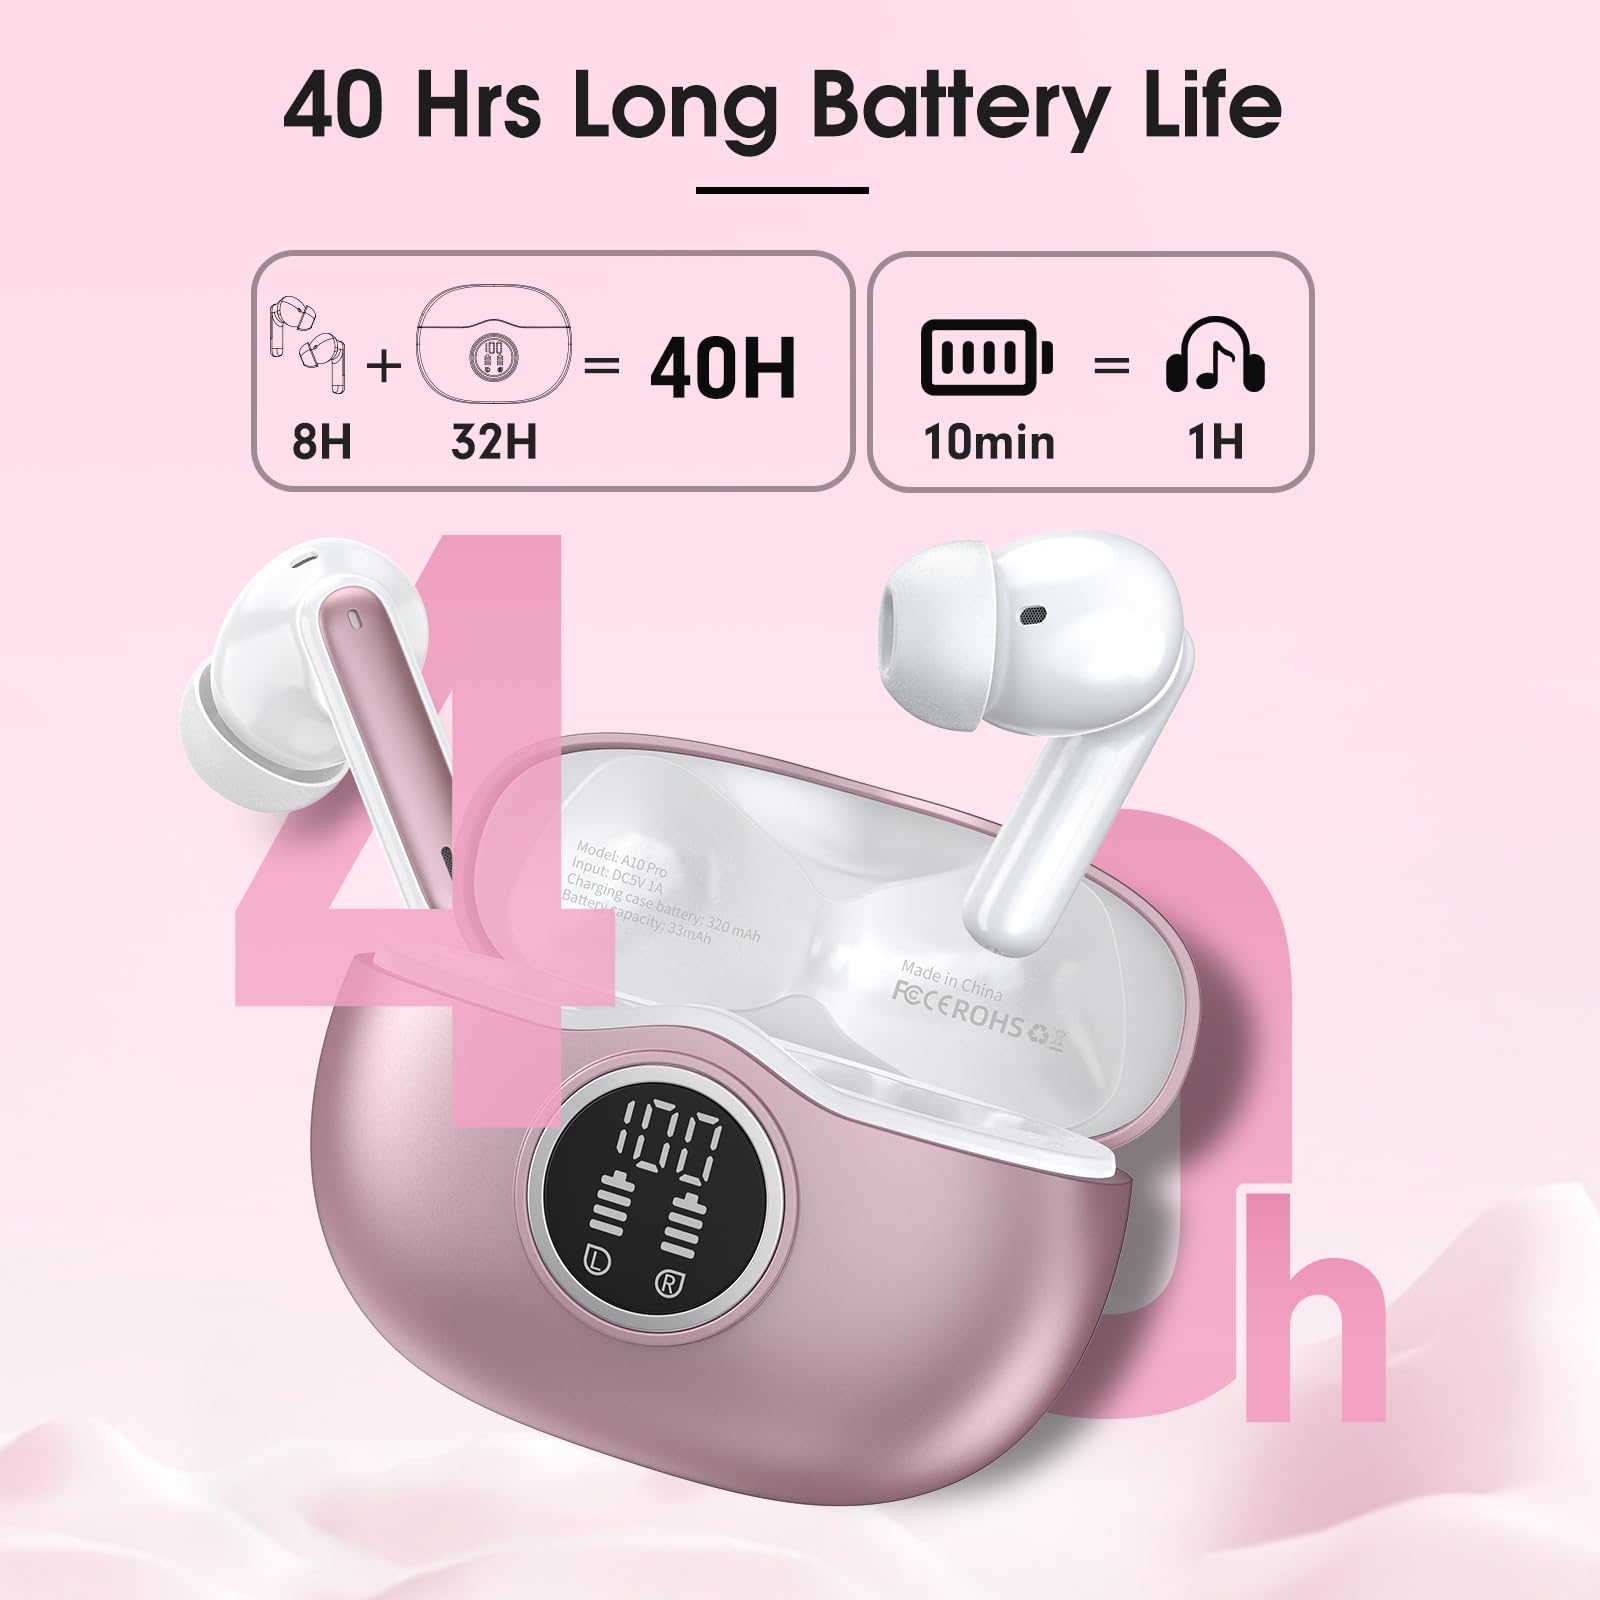 Wireless Earbuds Bluetooth 5.3 Headphones 40 Hrs Playtime with LED Display, Deep Bass Stereo and Noise Cancelling Bluetooth Ear Buds IP7 Waterproof Wireless Earphones for iPhone Android, Rose Gold